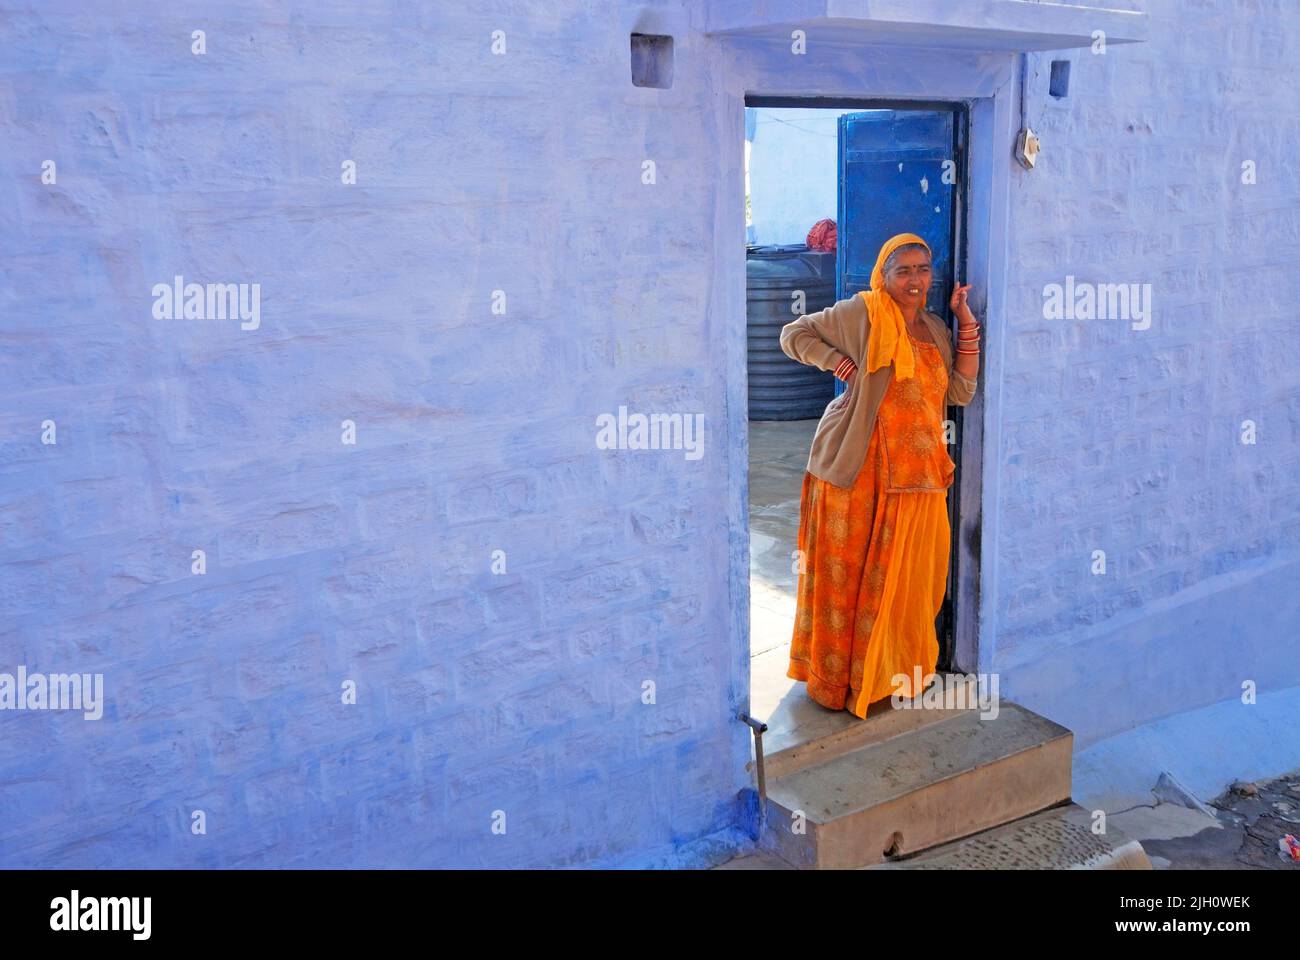 Judhpur People, Woman stand in her house doorstep, India Stock Photo